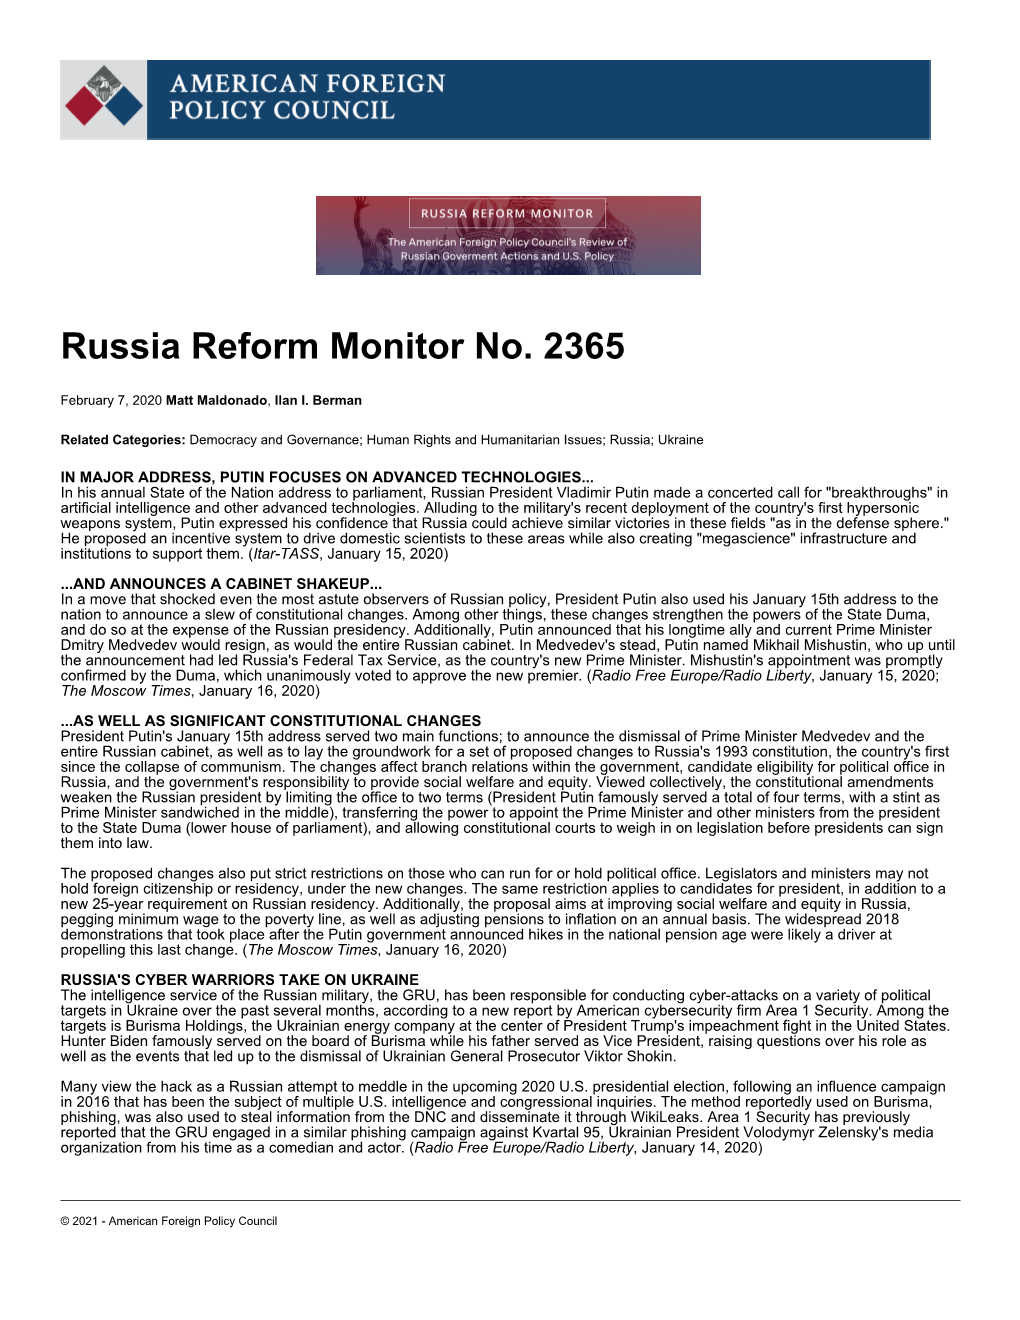 Russia Reform Monitor No. 2365 | American Foreign Policy Council